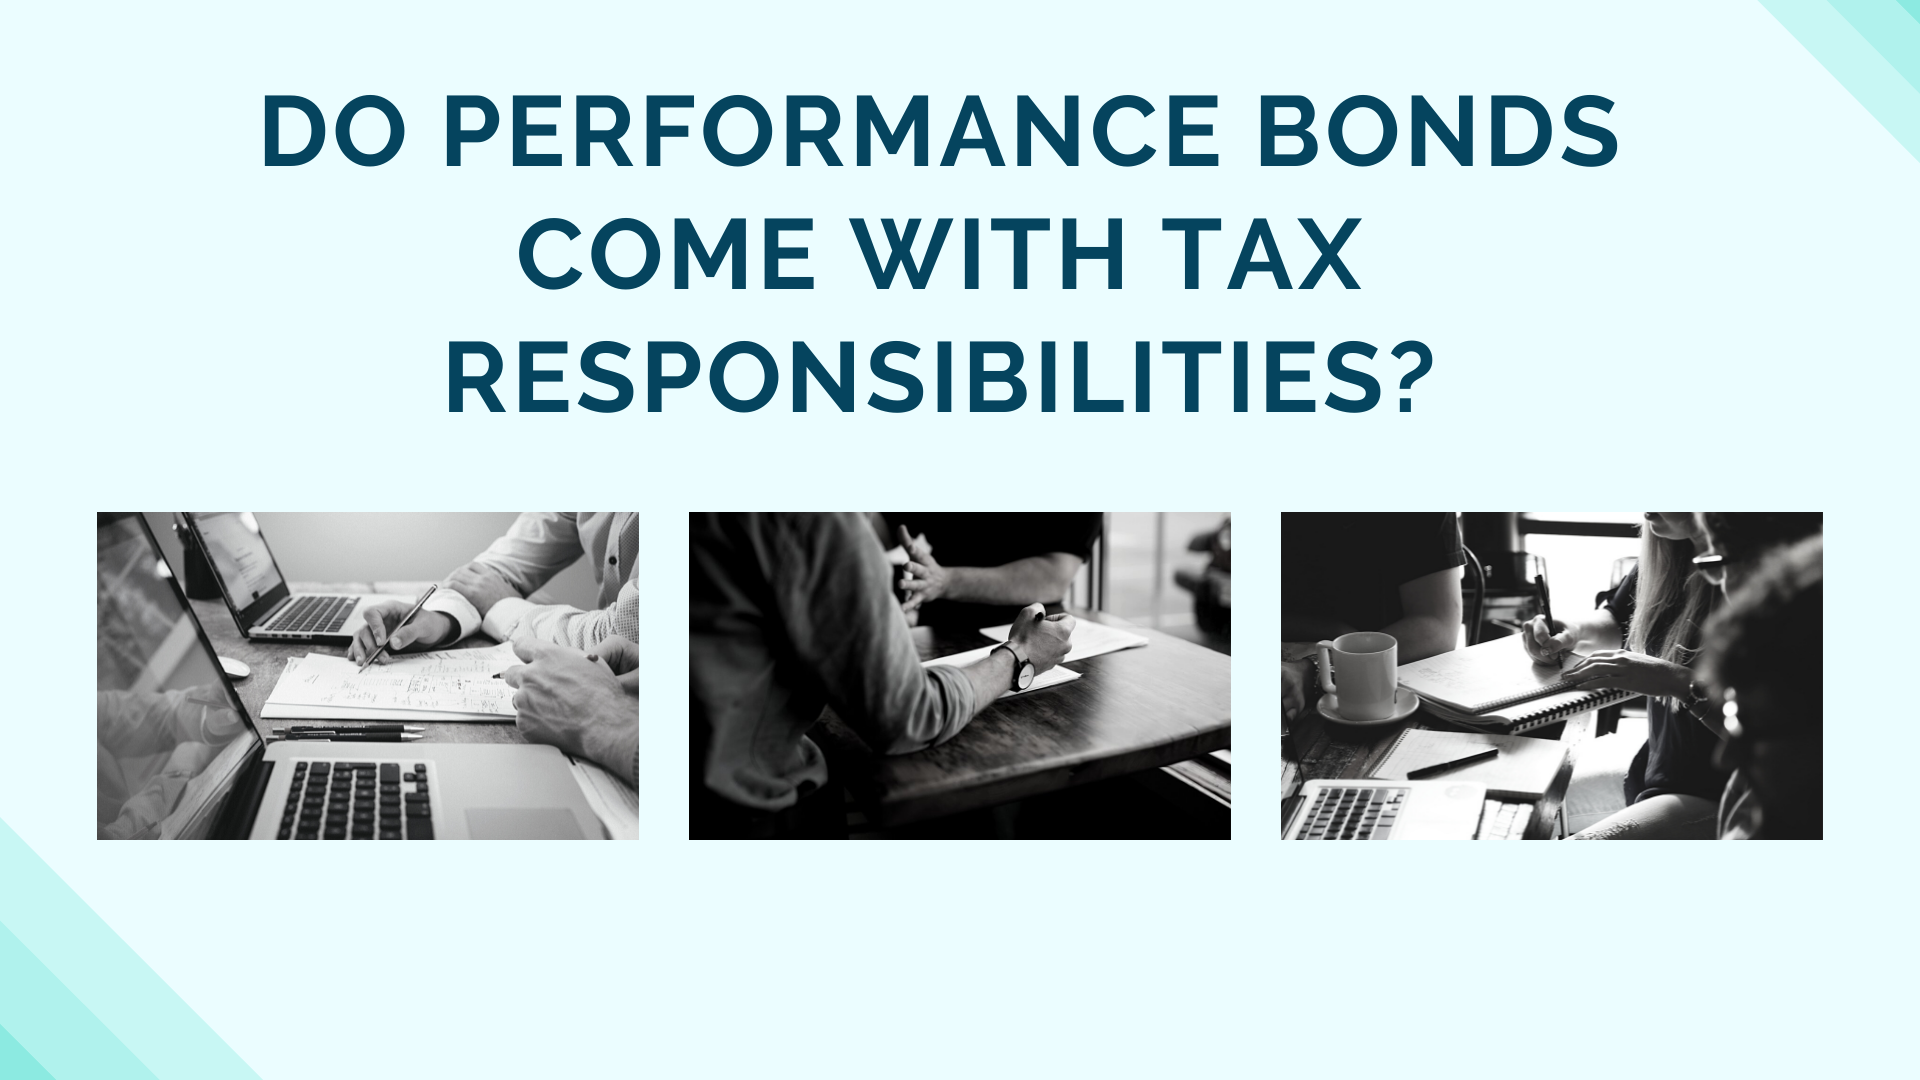 performance bond - Is it possible for performance bonds to be taxed